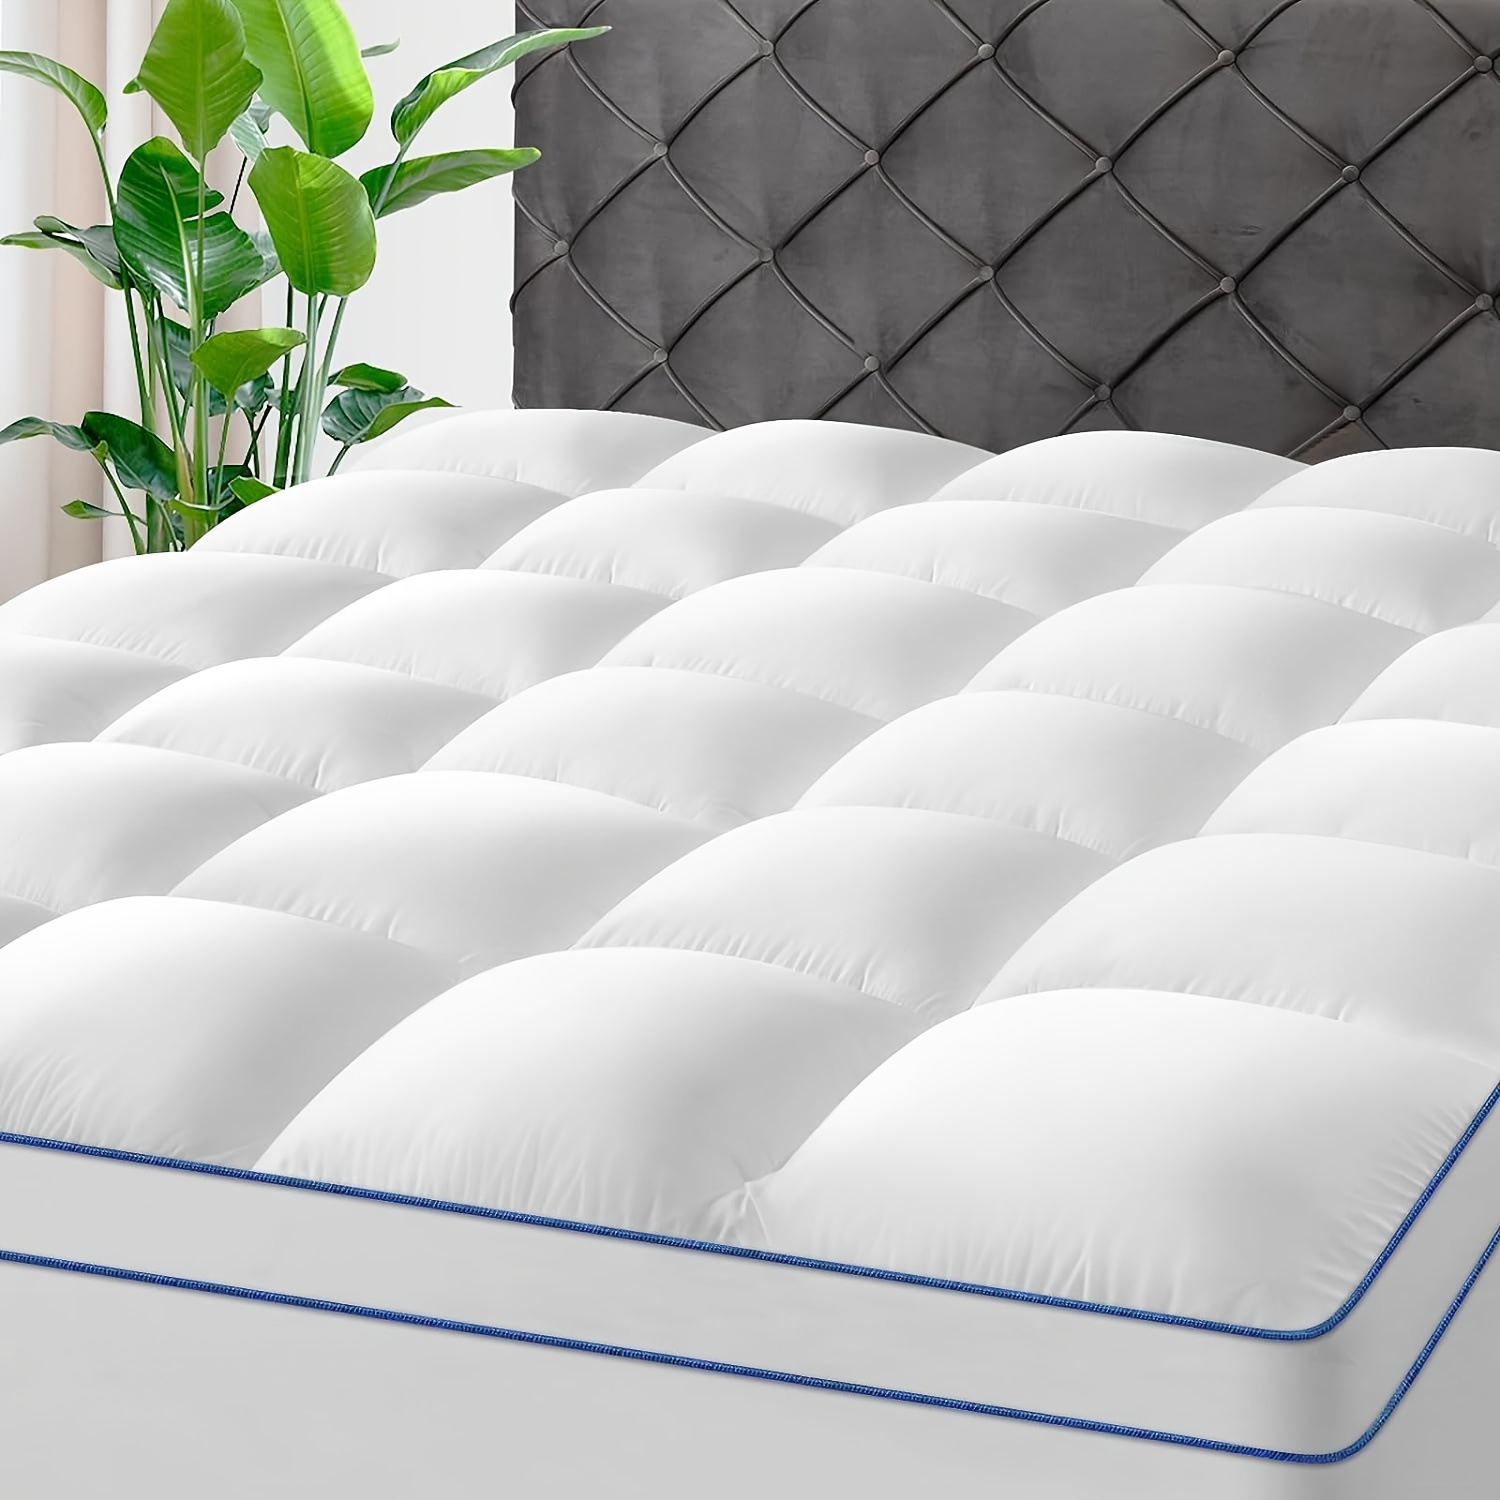 

Mattress Topper, Extra Thick Mattress Pad Cover For Deep Sleep, Cotton Fill Plush Pillow Top Mattress With 8-23 Inch Deep Pocket-soft And Breathable Bed Topper Cover, White